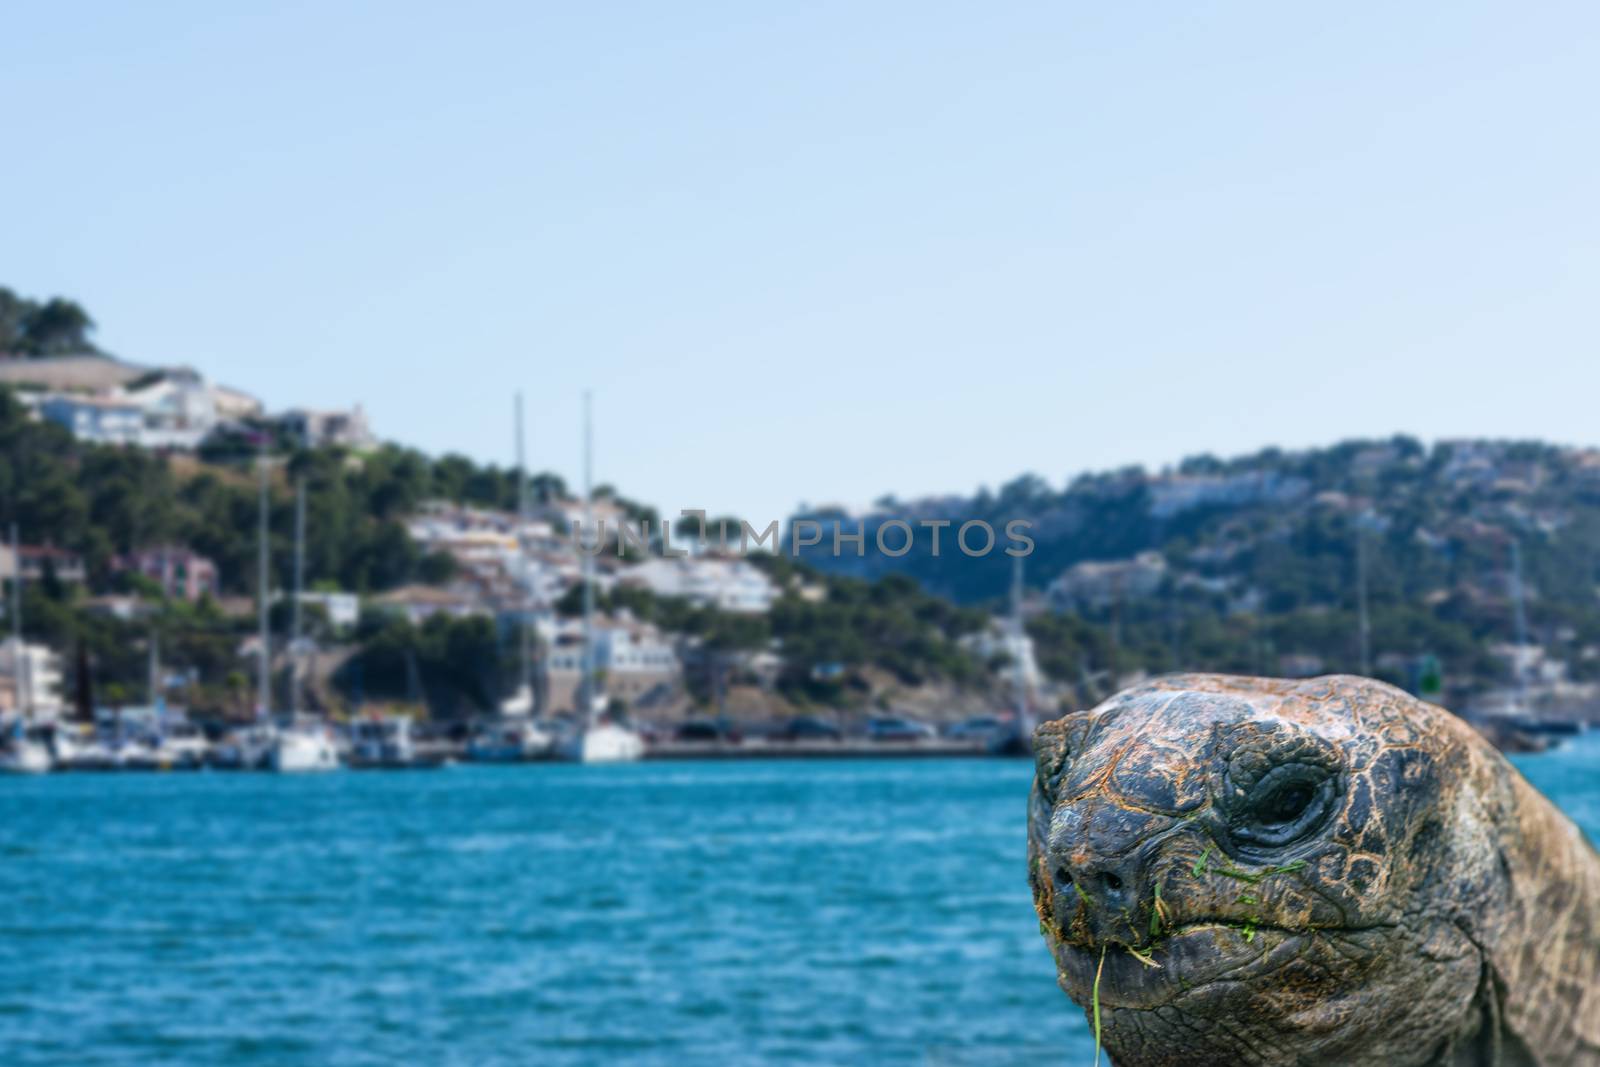 Giant turtle in front of blue sea in a book, background intentional blur.